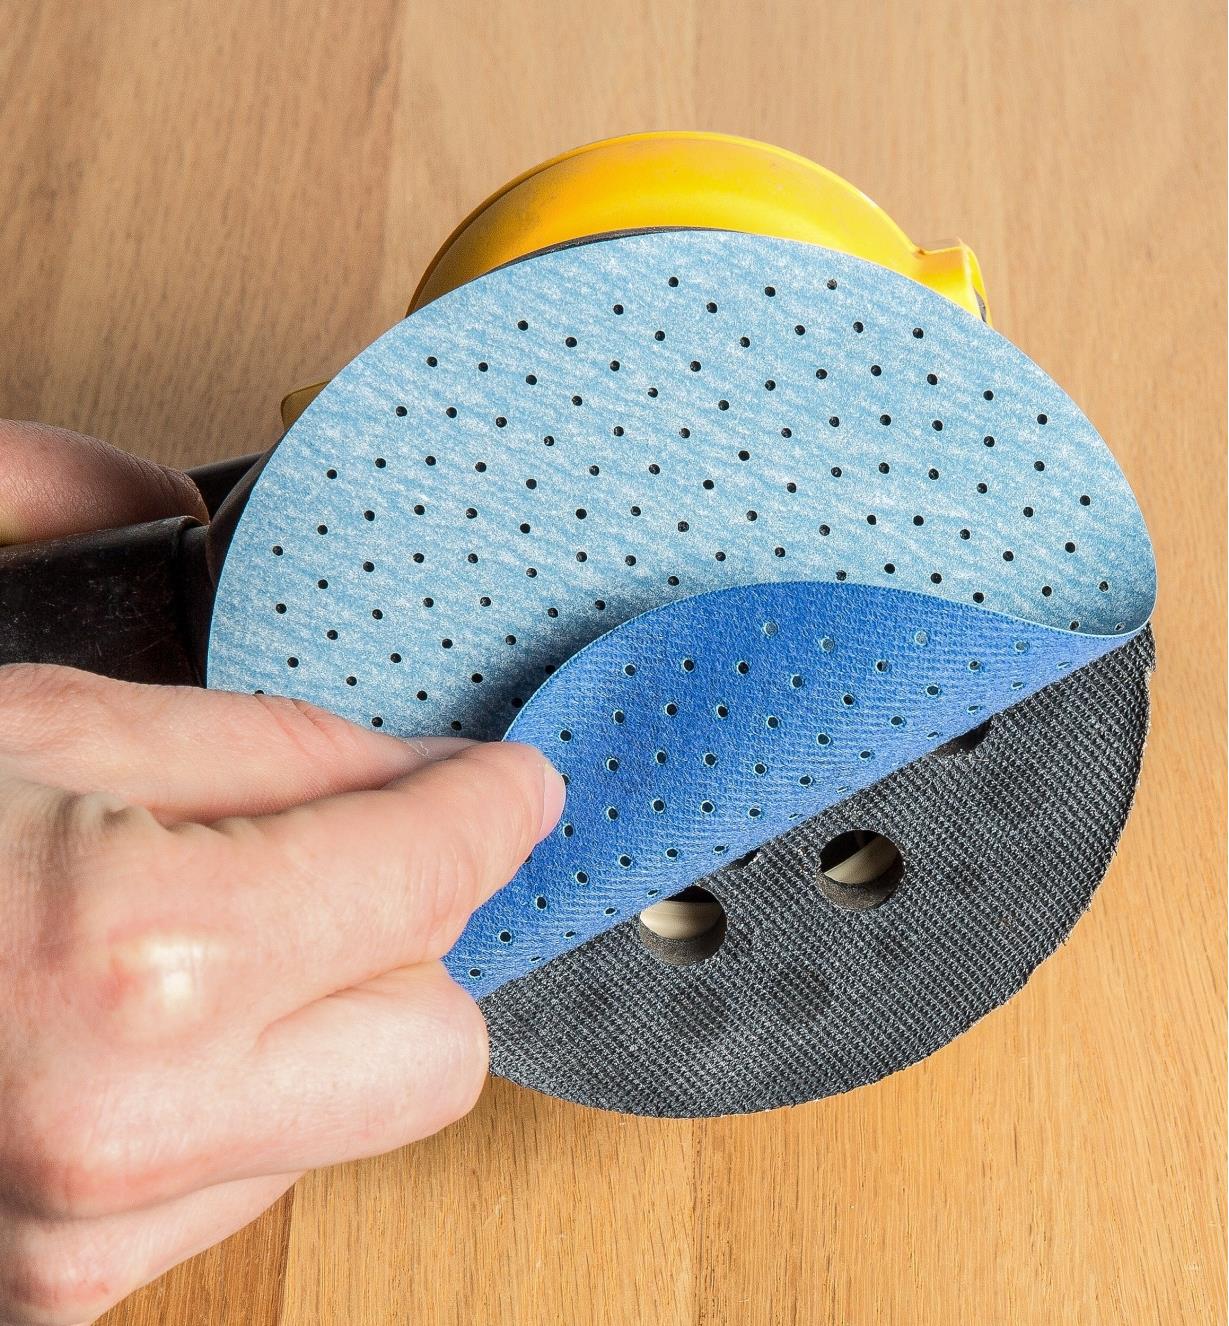 Attaching a disc to an electric sander